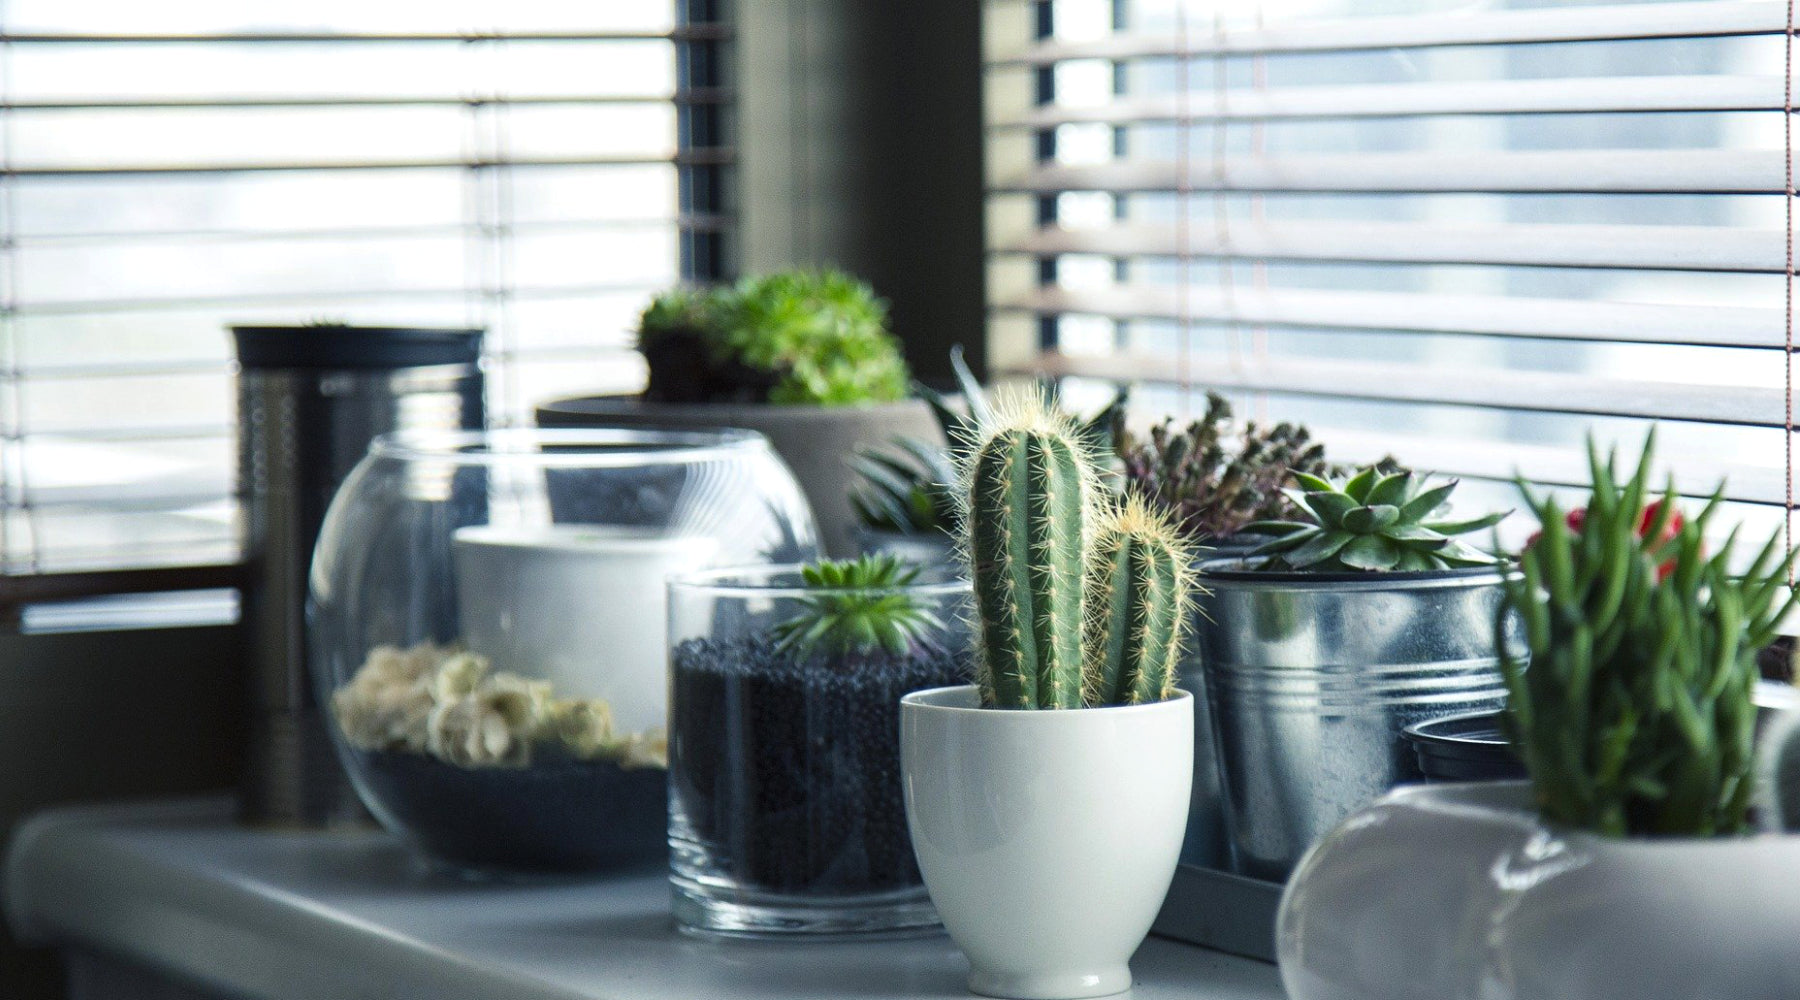 Are clean windows better for plants. Plant like cacti and succulents near window.